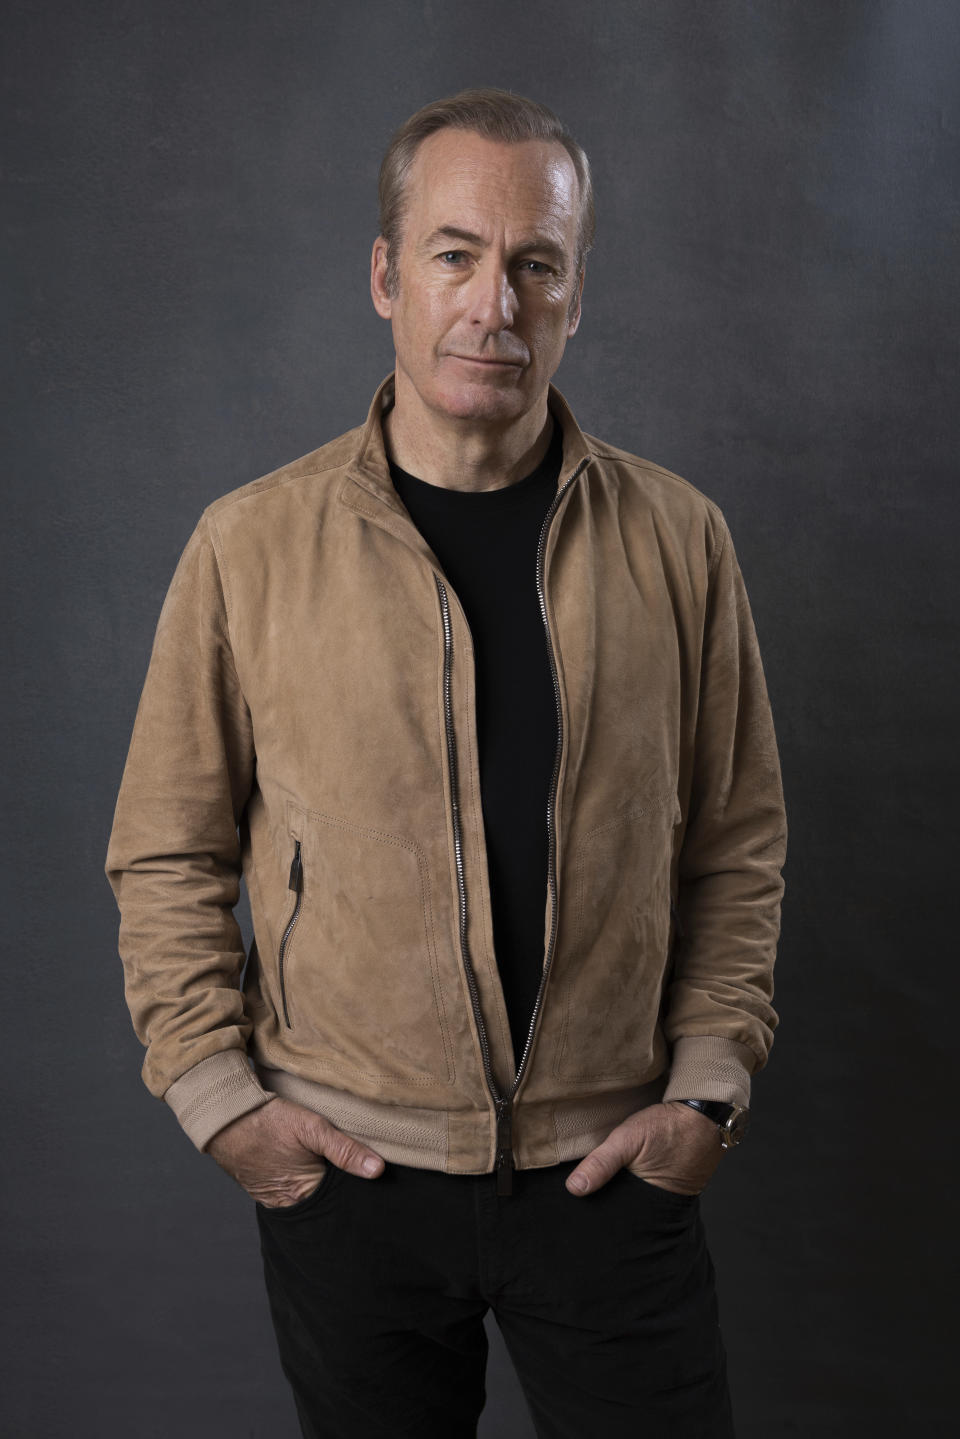 Bob Odenkirk, a cast member in the AMC television series "The Straight Man," poses for a portrait during the Winter Television Critics Association Press Tour on Tuesday, Jan. 10, 2023, at The Langham Huntington Hotel in Pasadena, Calif. (Willy Sanjuan/Invision/AP)